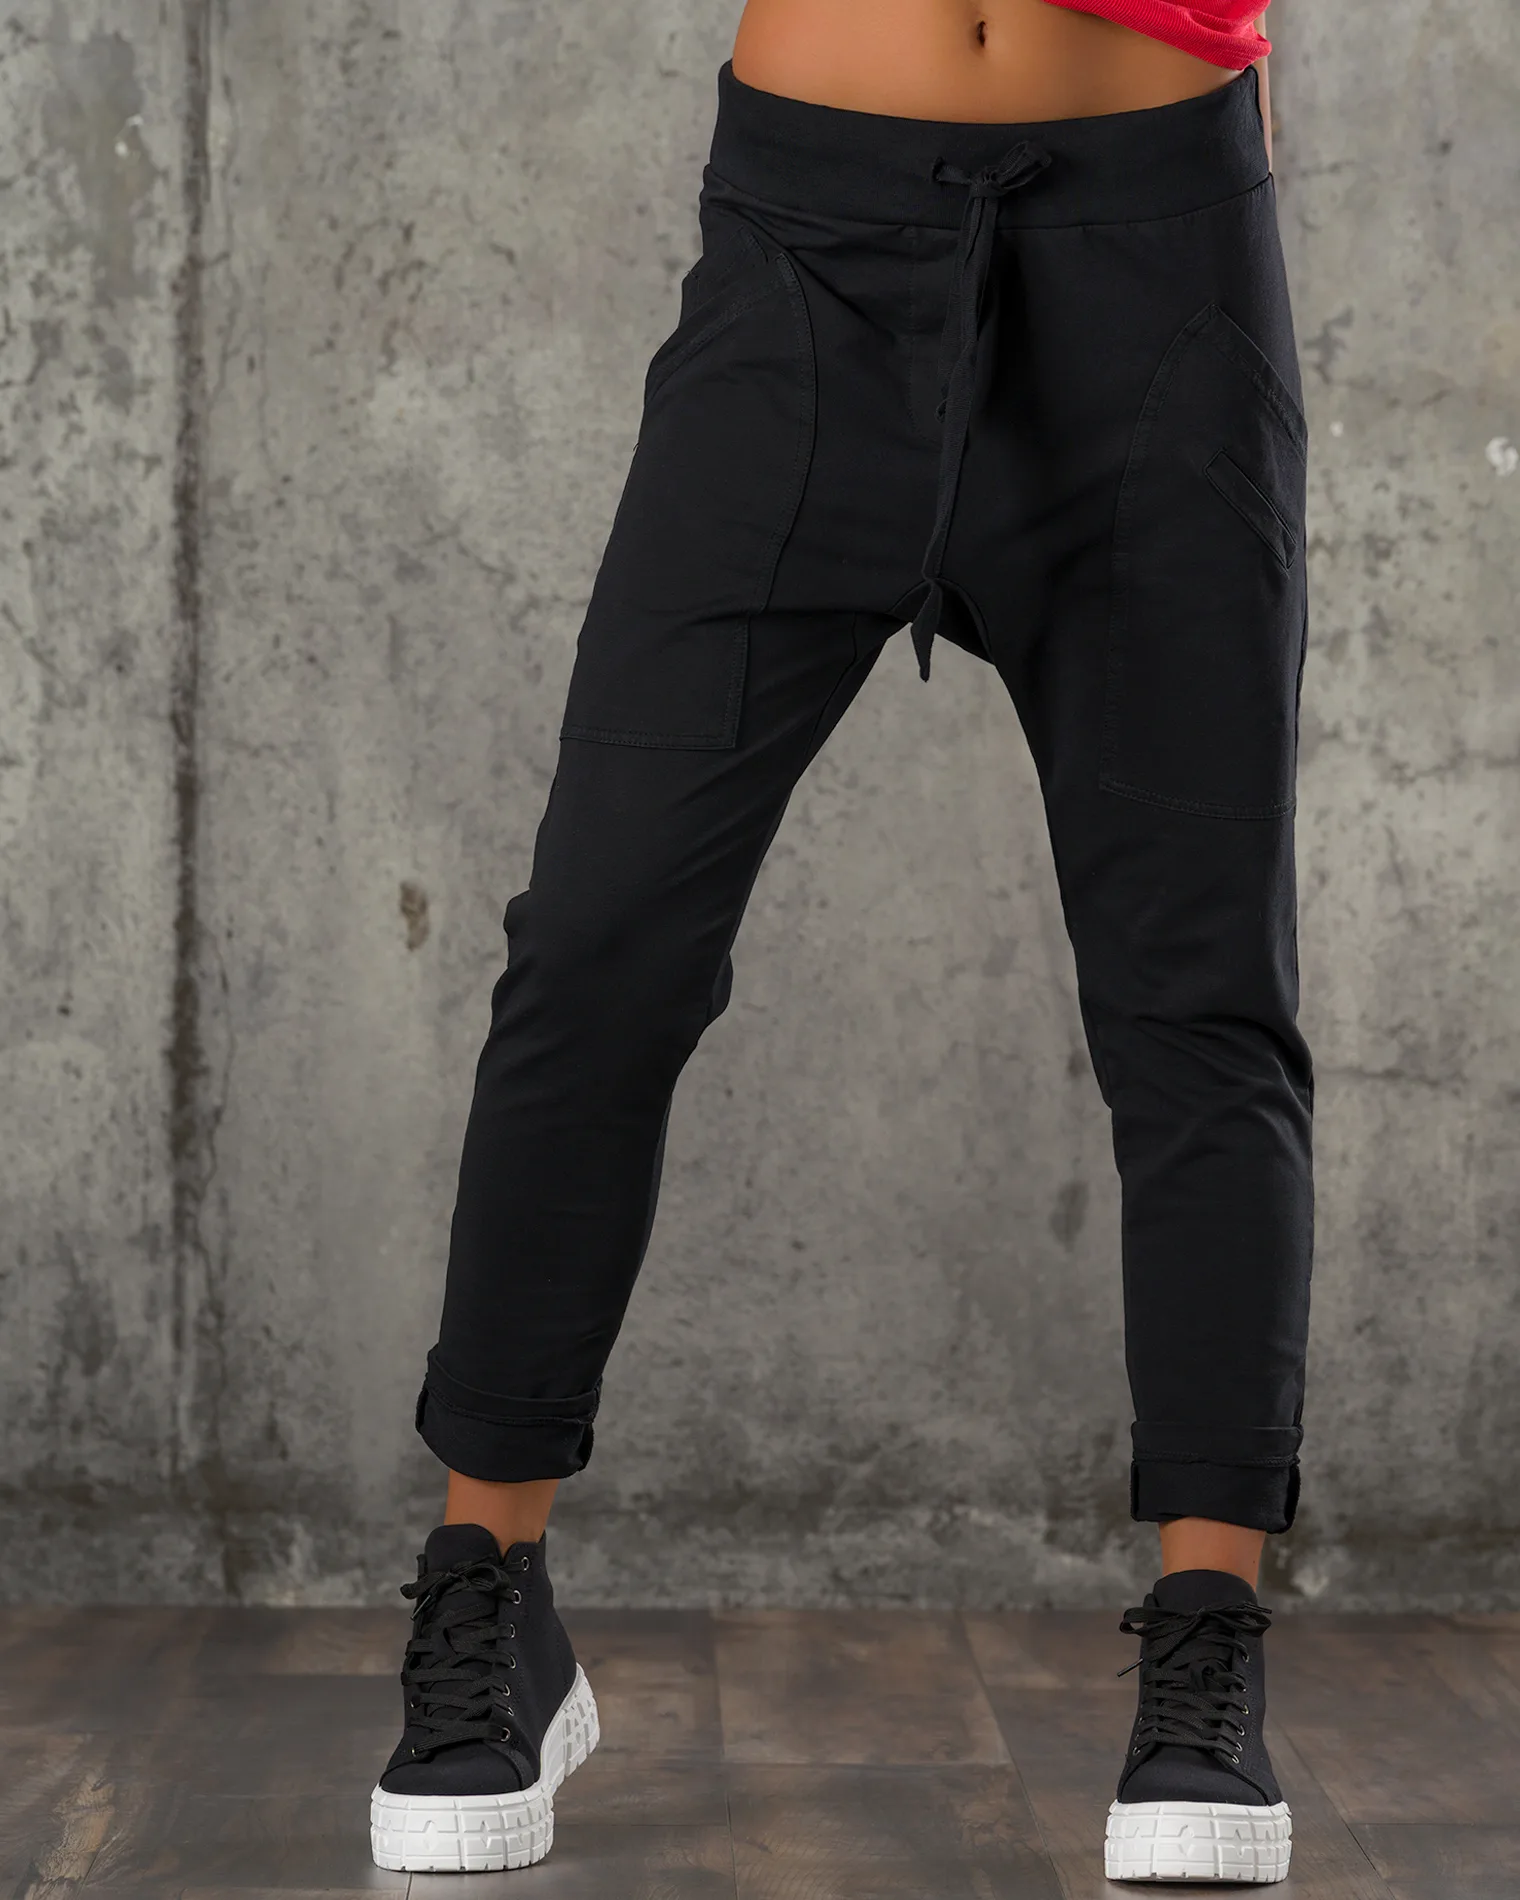 Telephone Trousers, Black Color